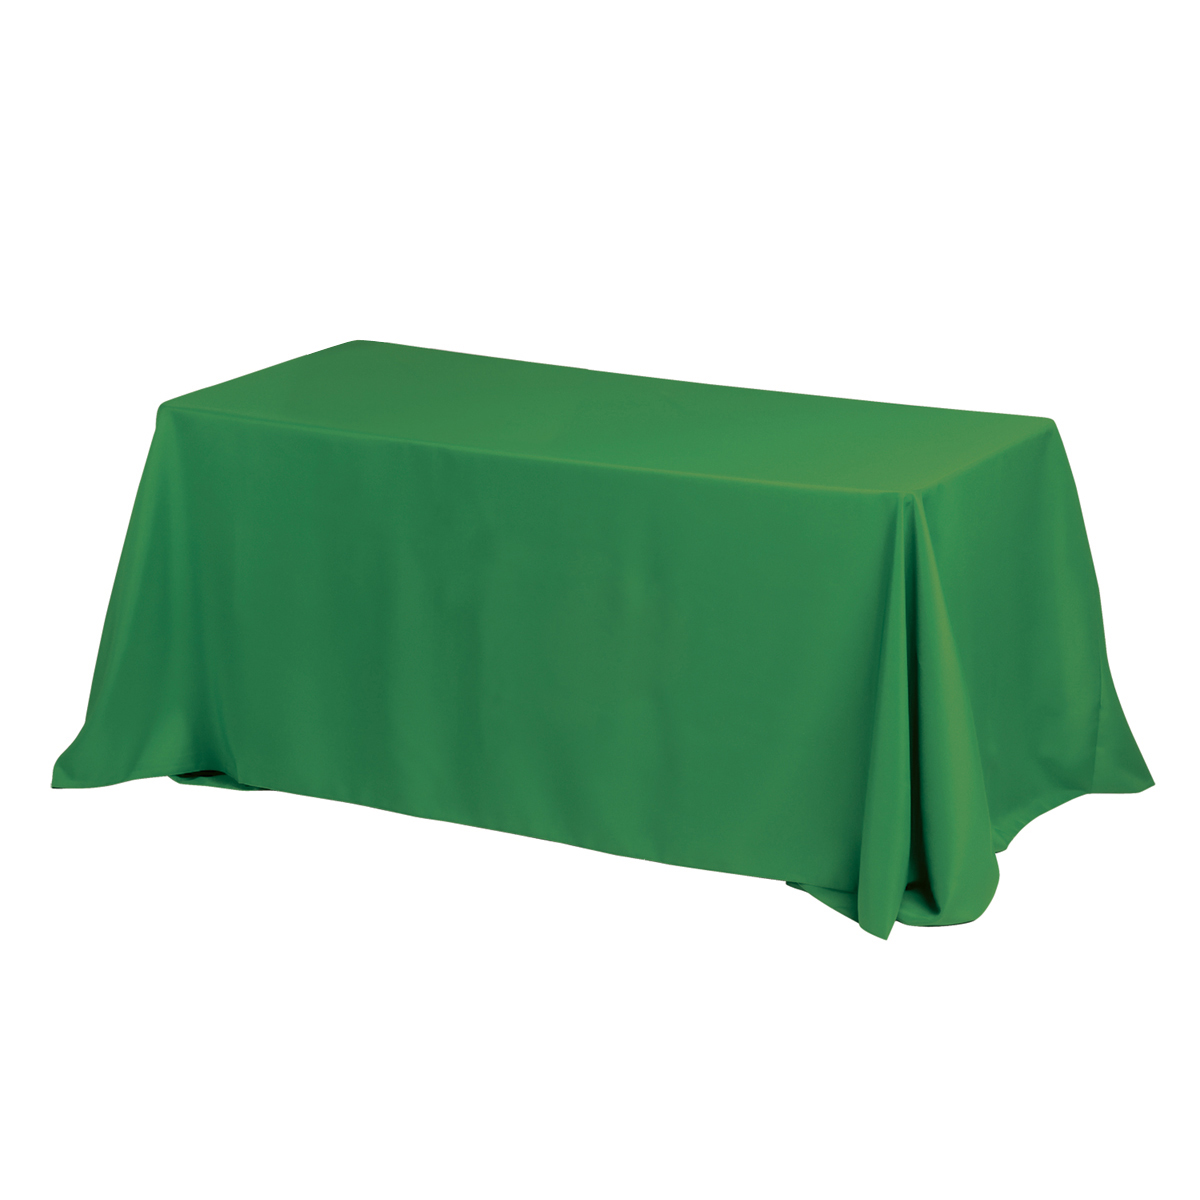 "Preakness Eight" 3-Sided Economy Table Covers & Table Throws -Blanks / Fits 8 ft Table